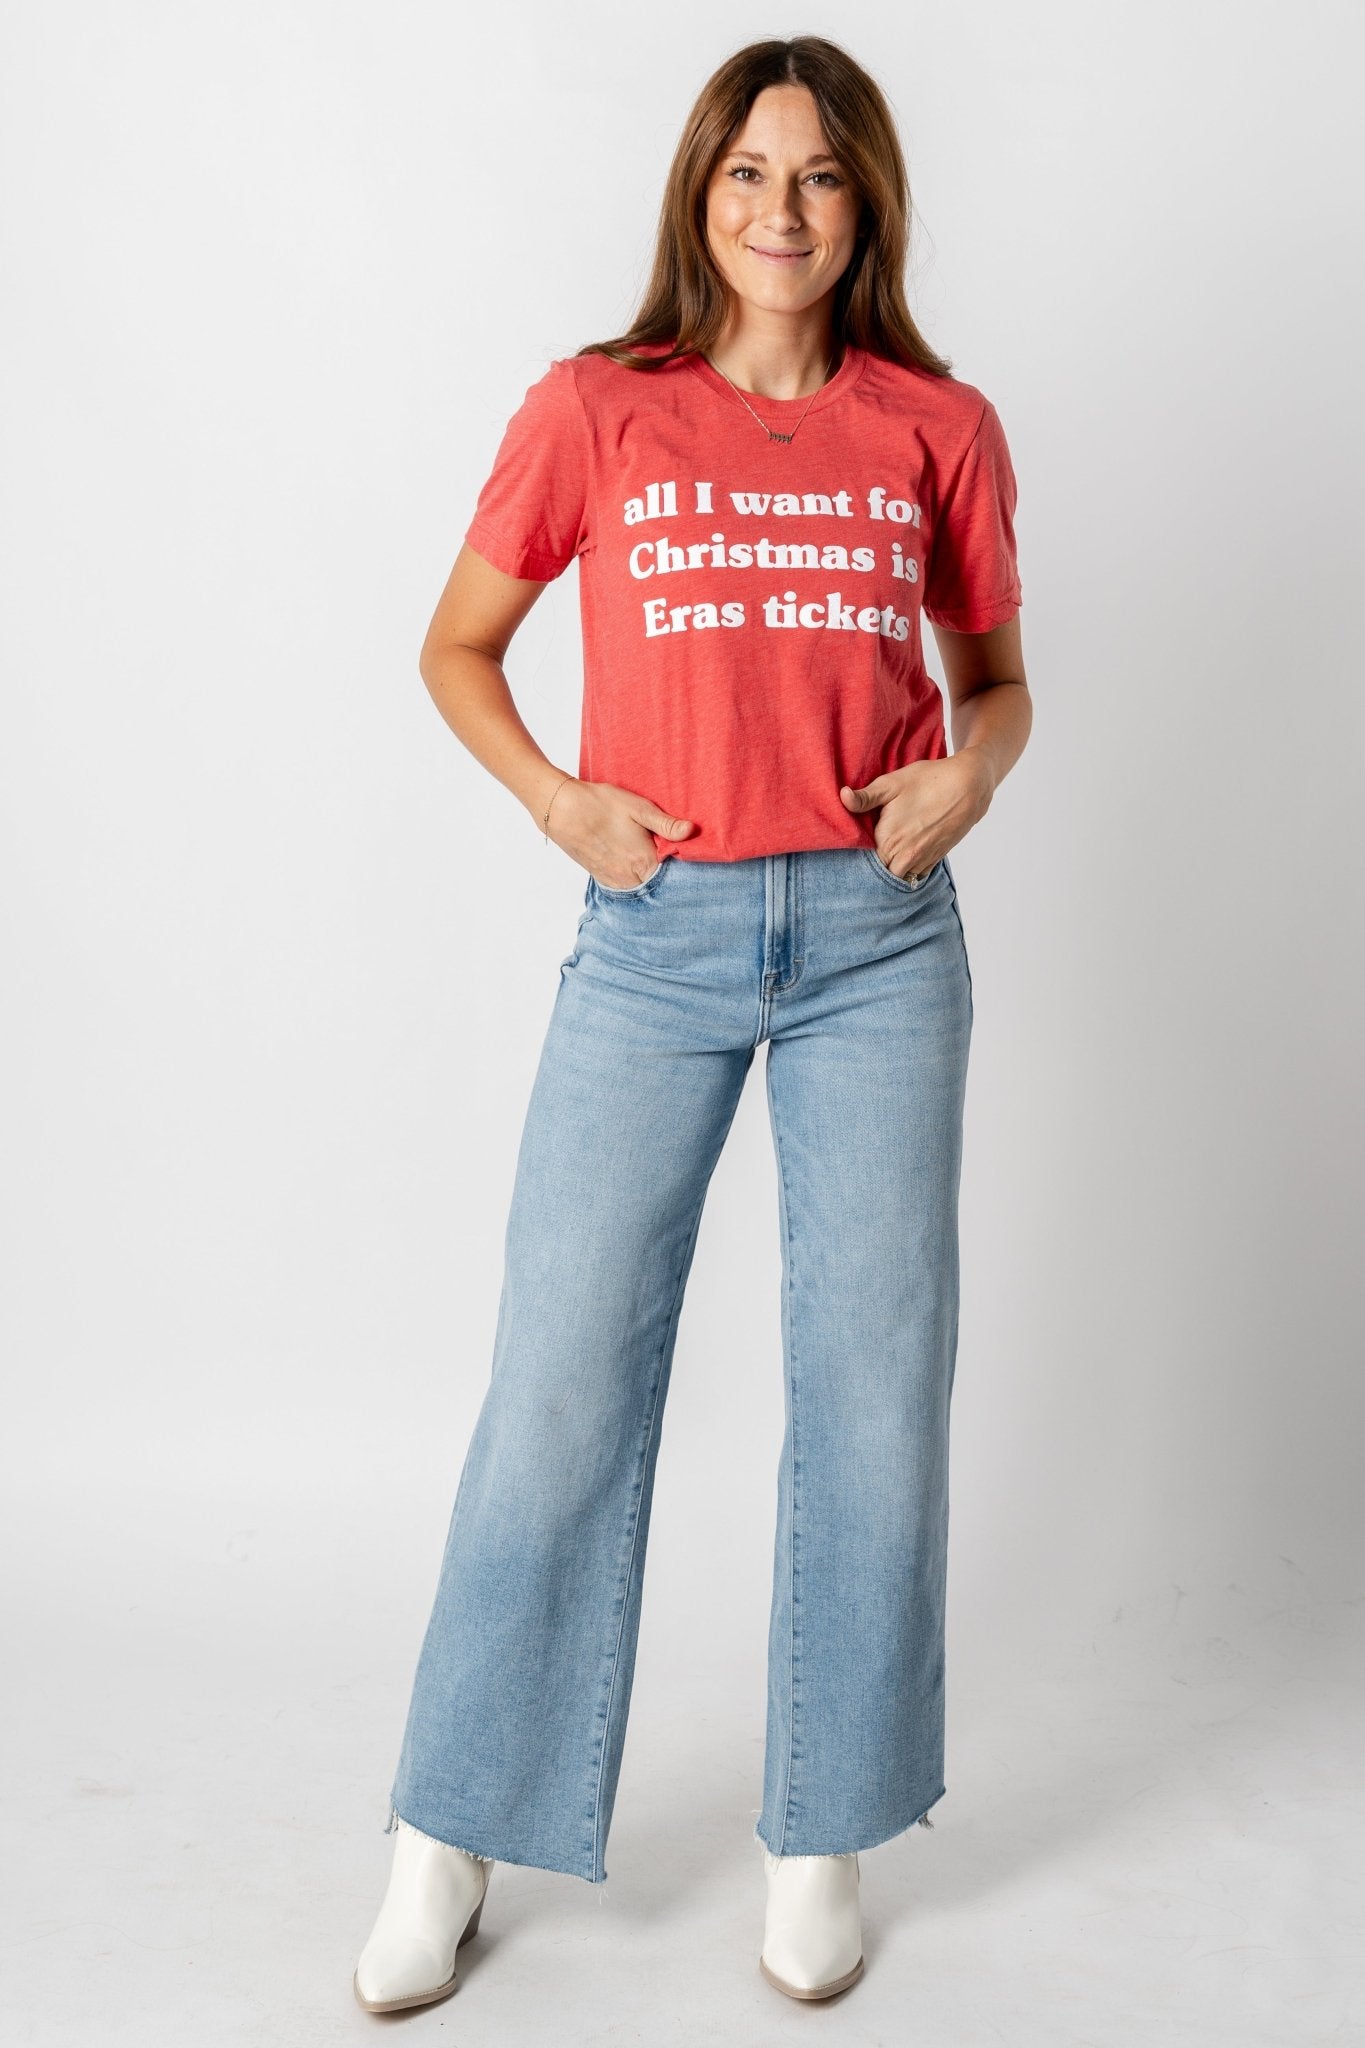 All I want for Christmas is Eras tickets t-shirt red - Exclusive Collection of Holiday Inspired T-Shirts and Hoodies at Lush Fashion Lounge Boutique in Oklahoma City